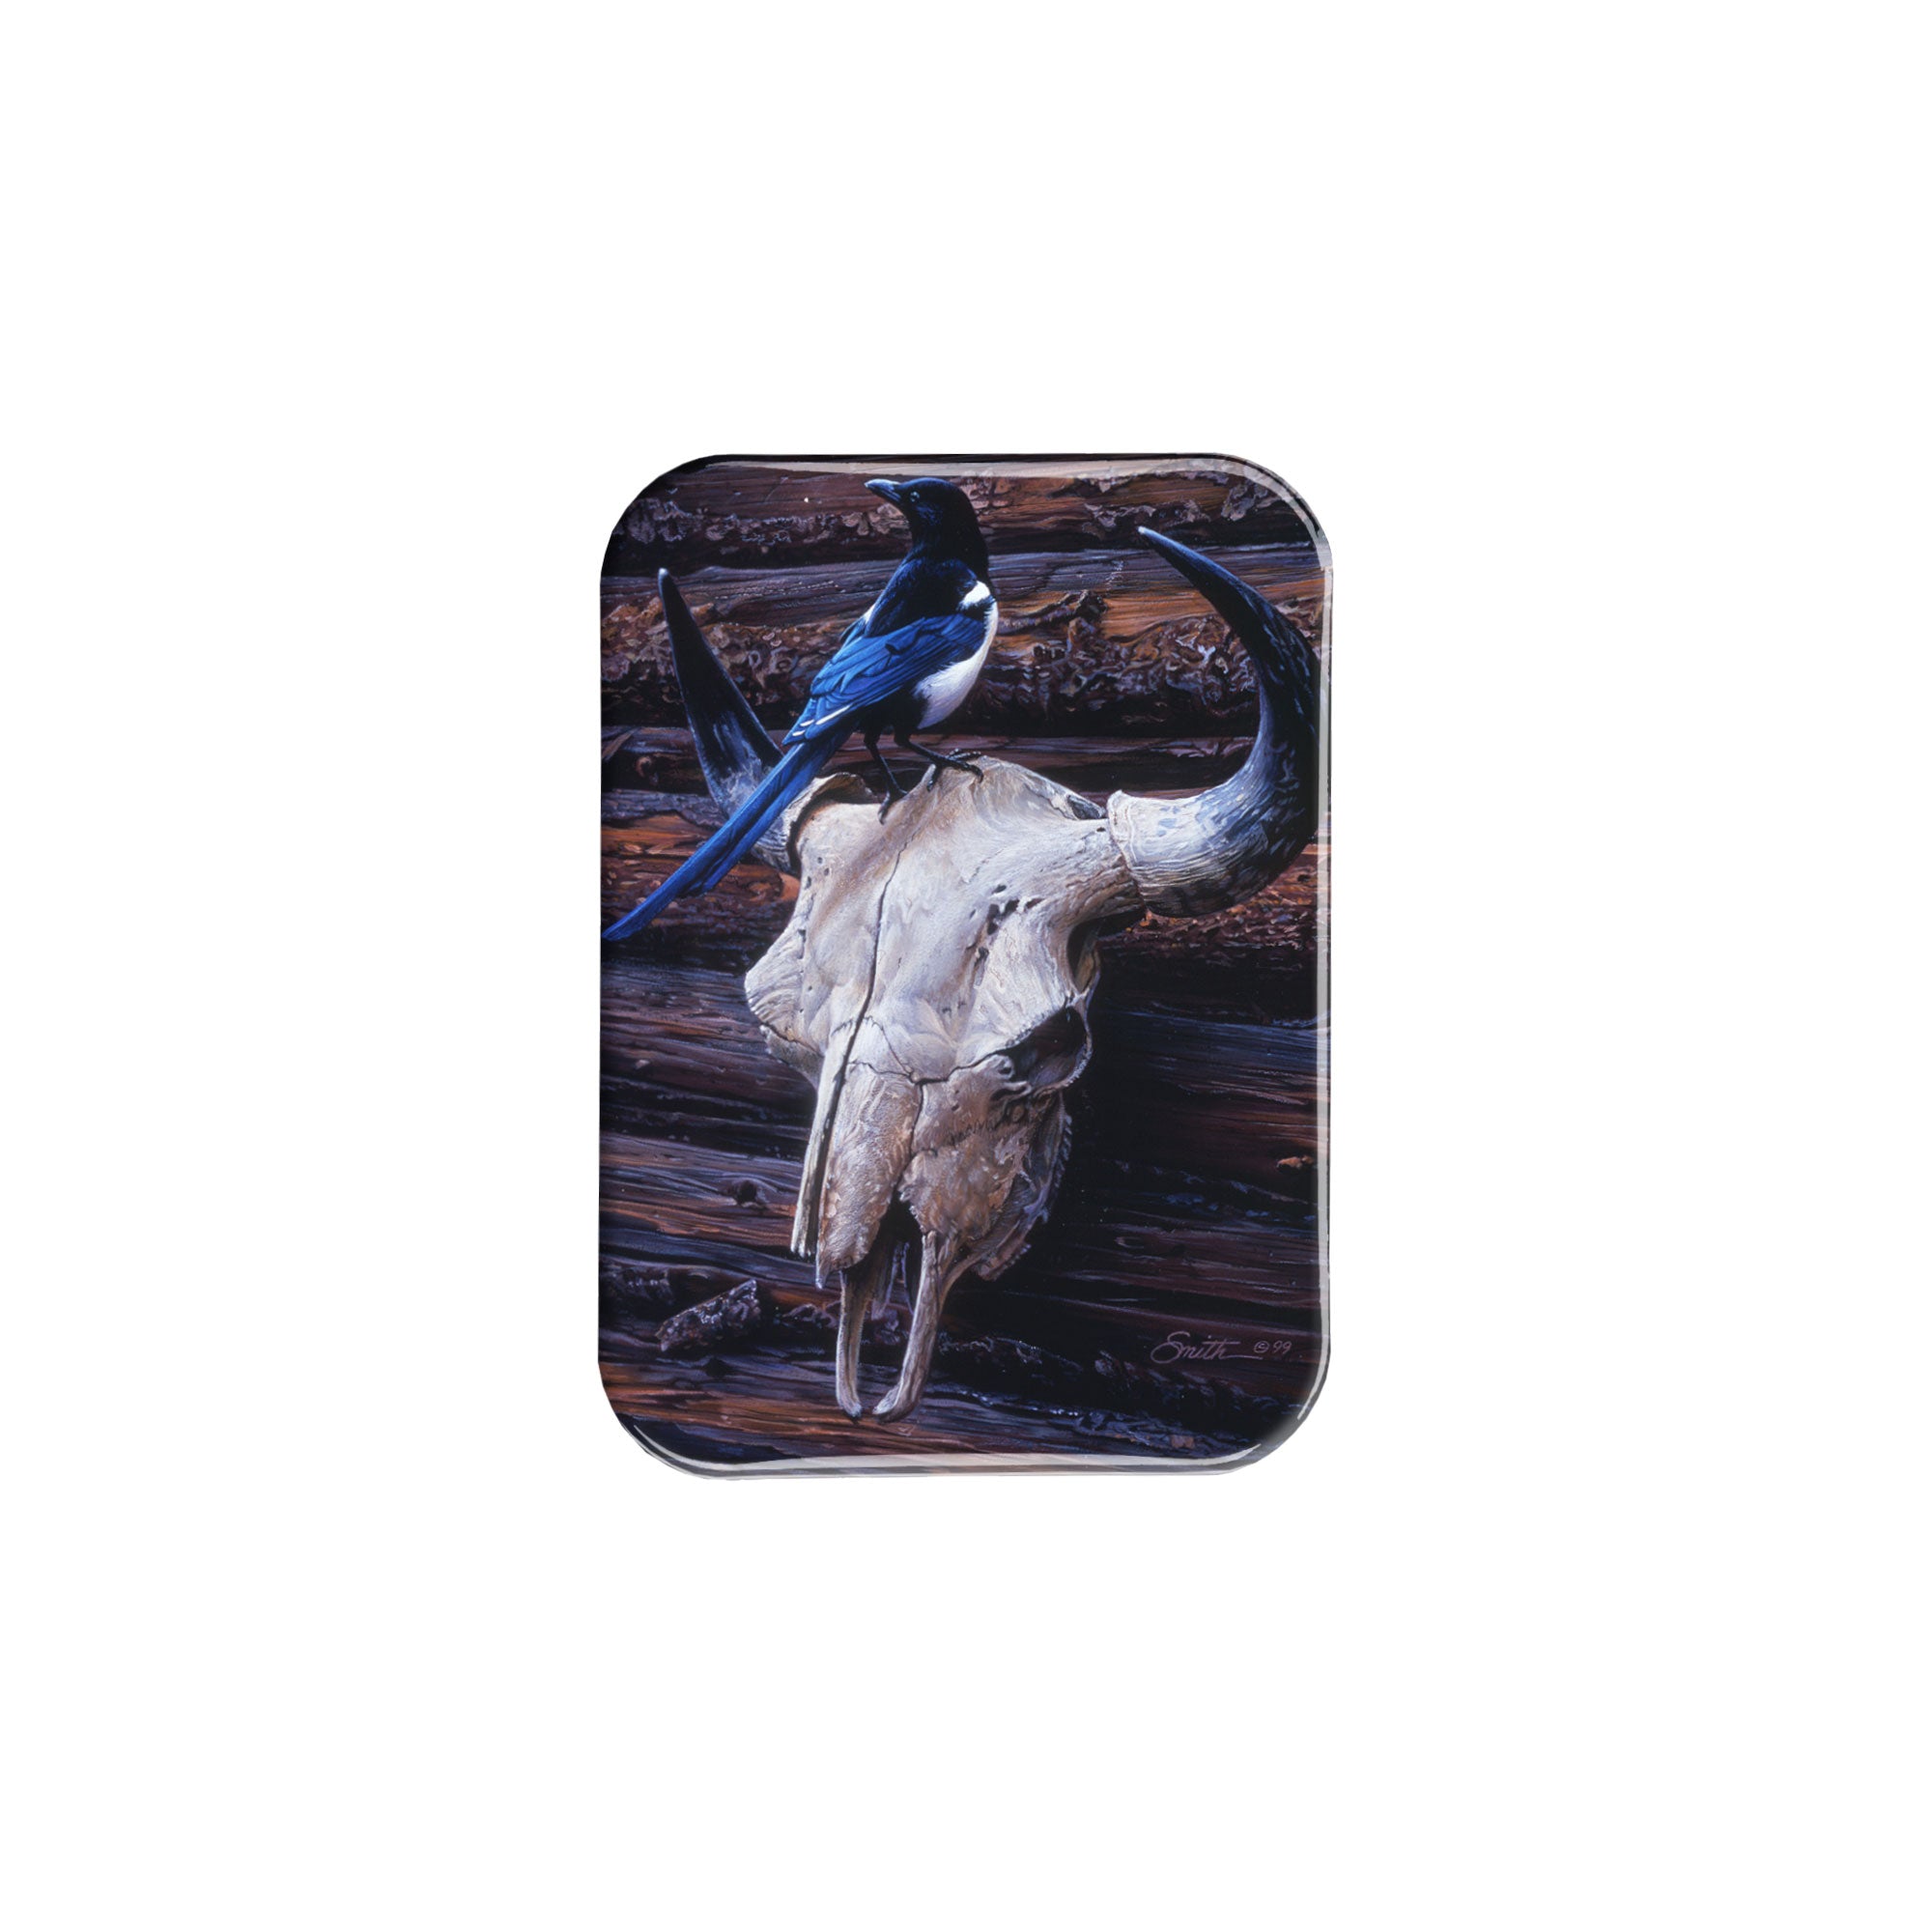 "Magpie and Skull" - 2.5" X 3.5" Rectangle Fridge Magnets